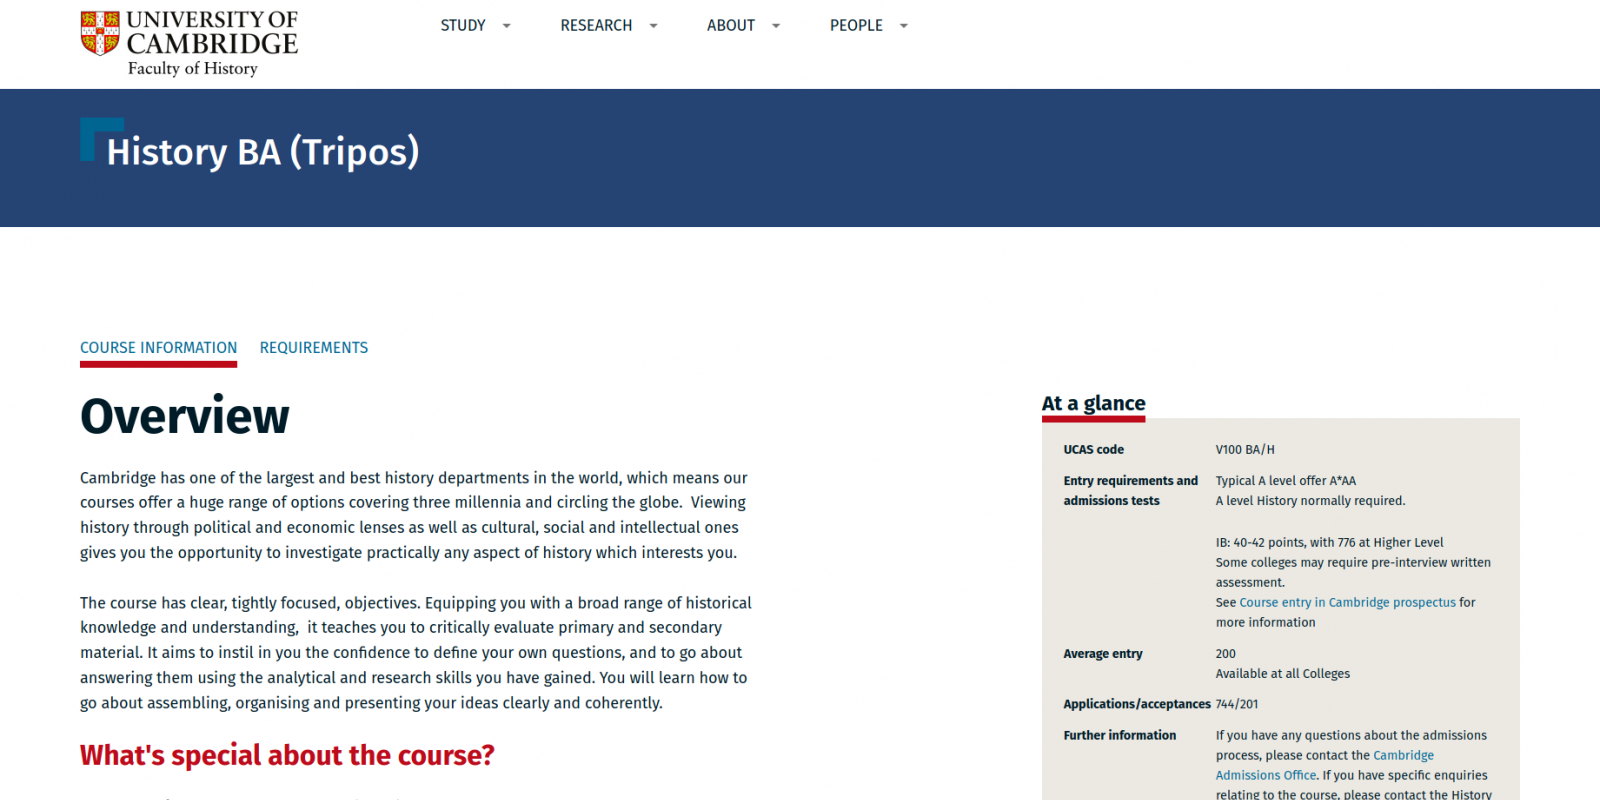 Faculty of History - University of Cambridge - website course detail page